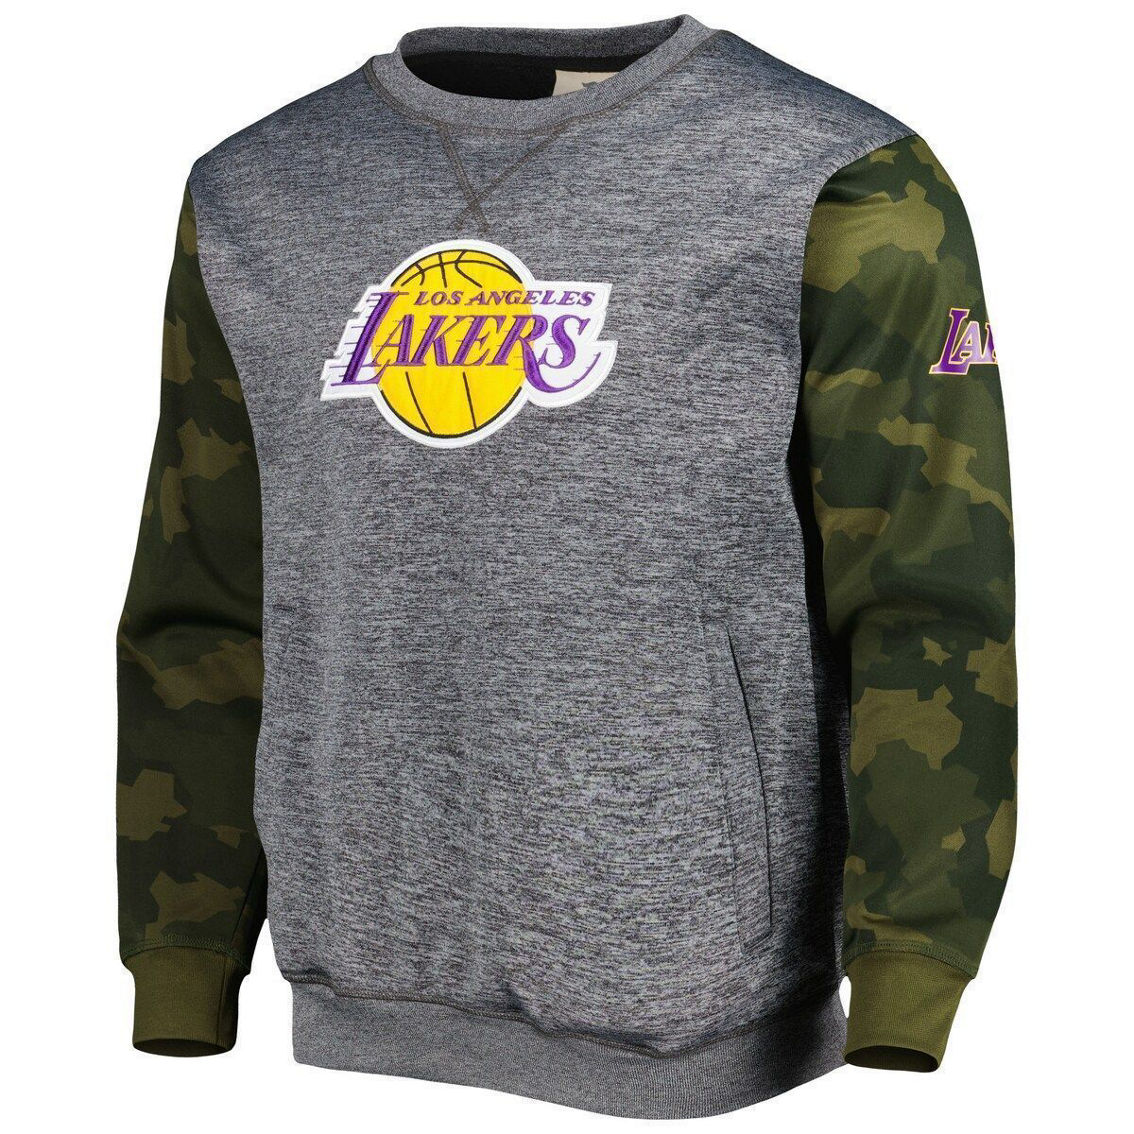 Fanatics Branded Men's Heather Charcoal Los Angeles Lakers Camo Stitched Sweatshirt - Image 3 of 4